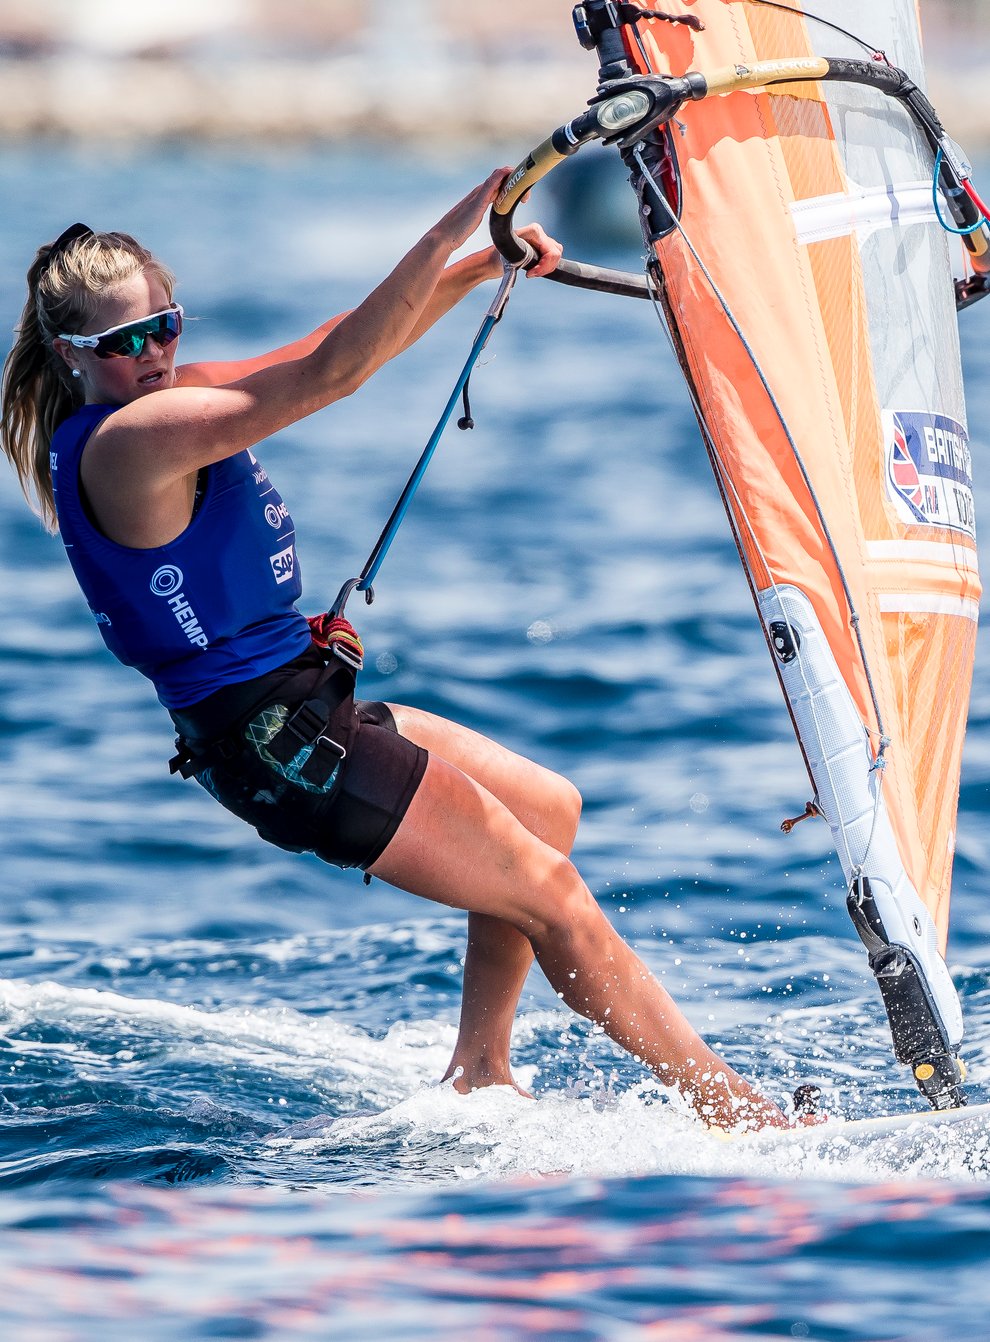 Saskia Sills finished ninth in the windsurfing world championship in Italy this year (Credit: Sailing Energy / World Sailing)